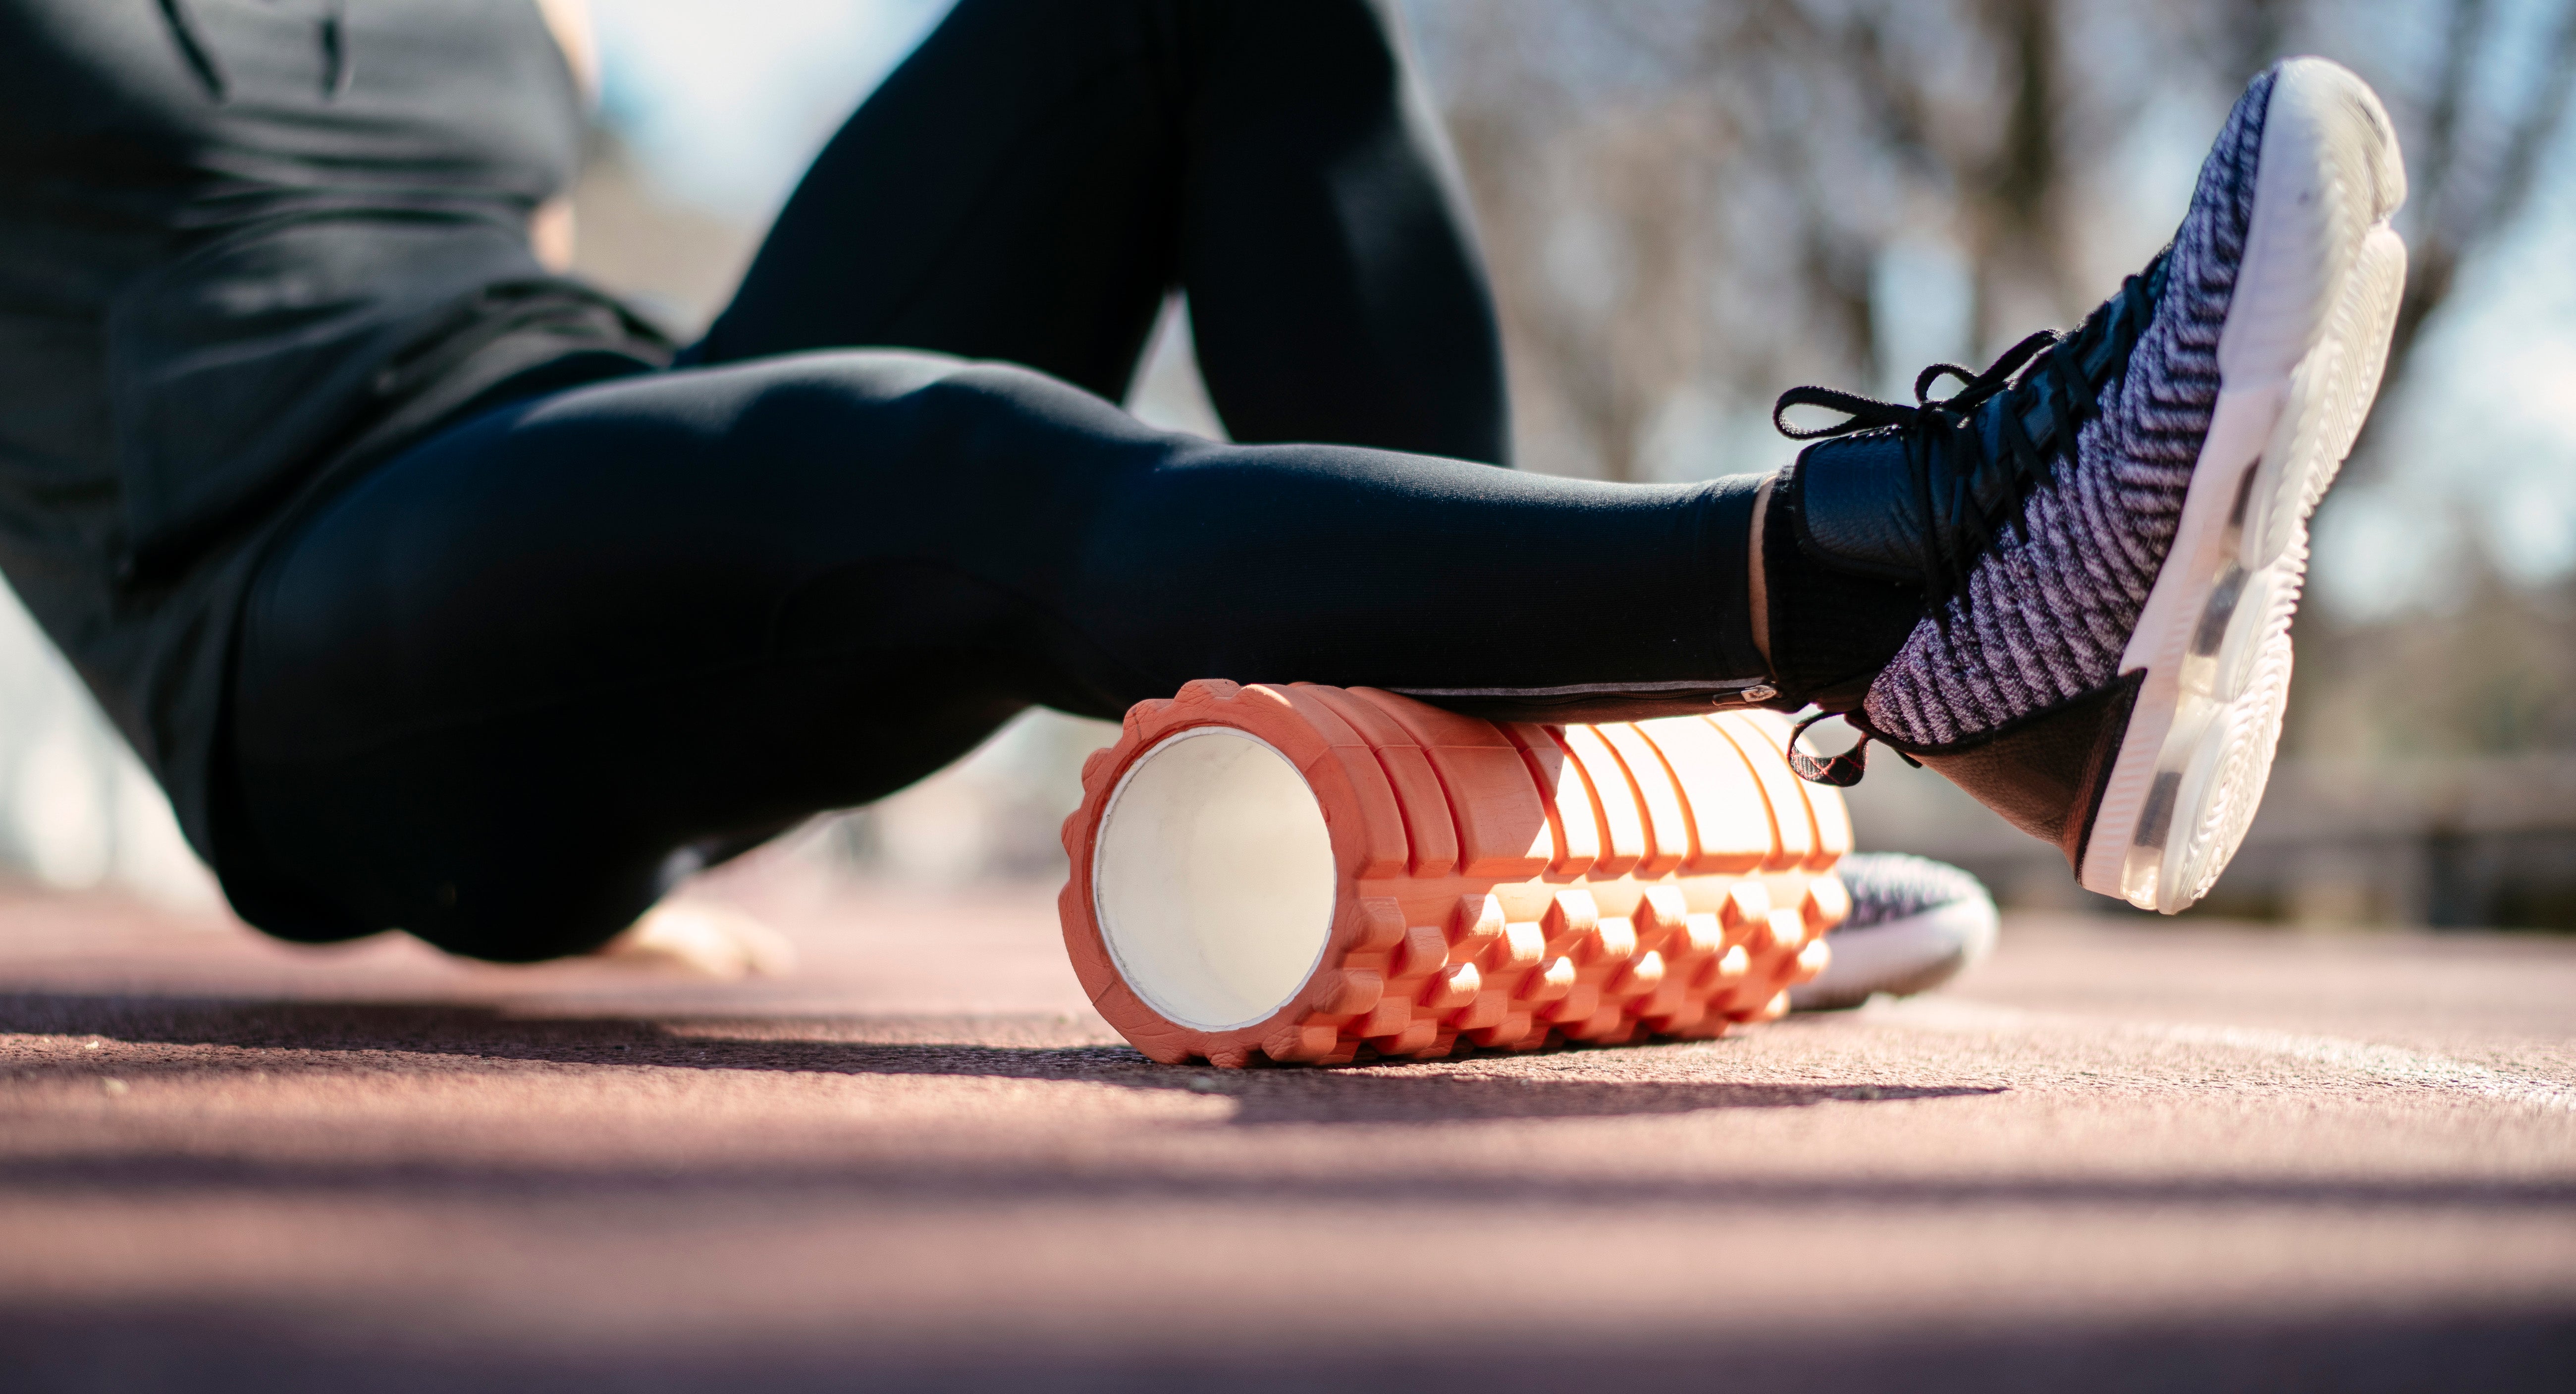 Foam Roller Moves For Weight Loss and Cellulite Reduction